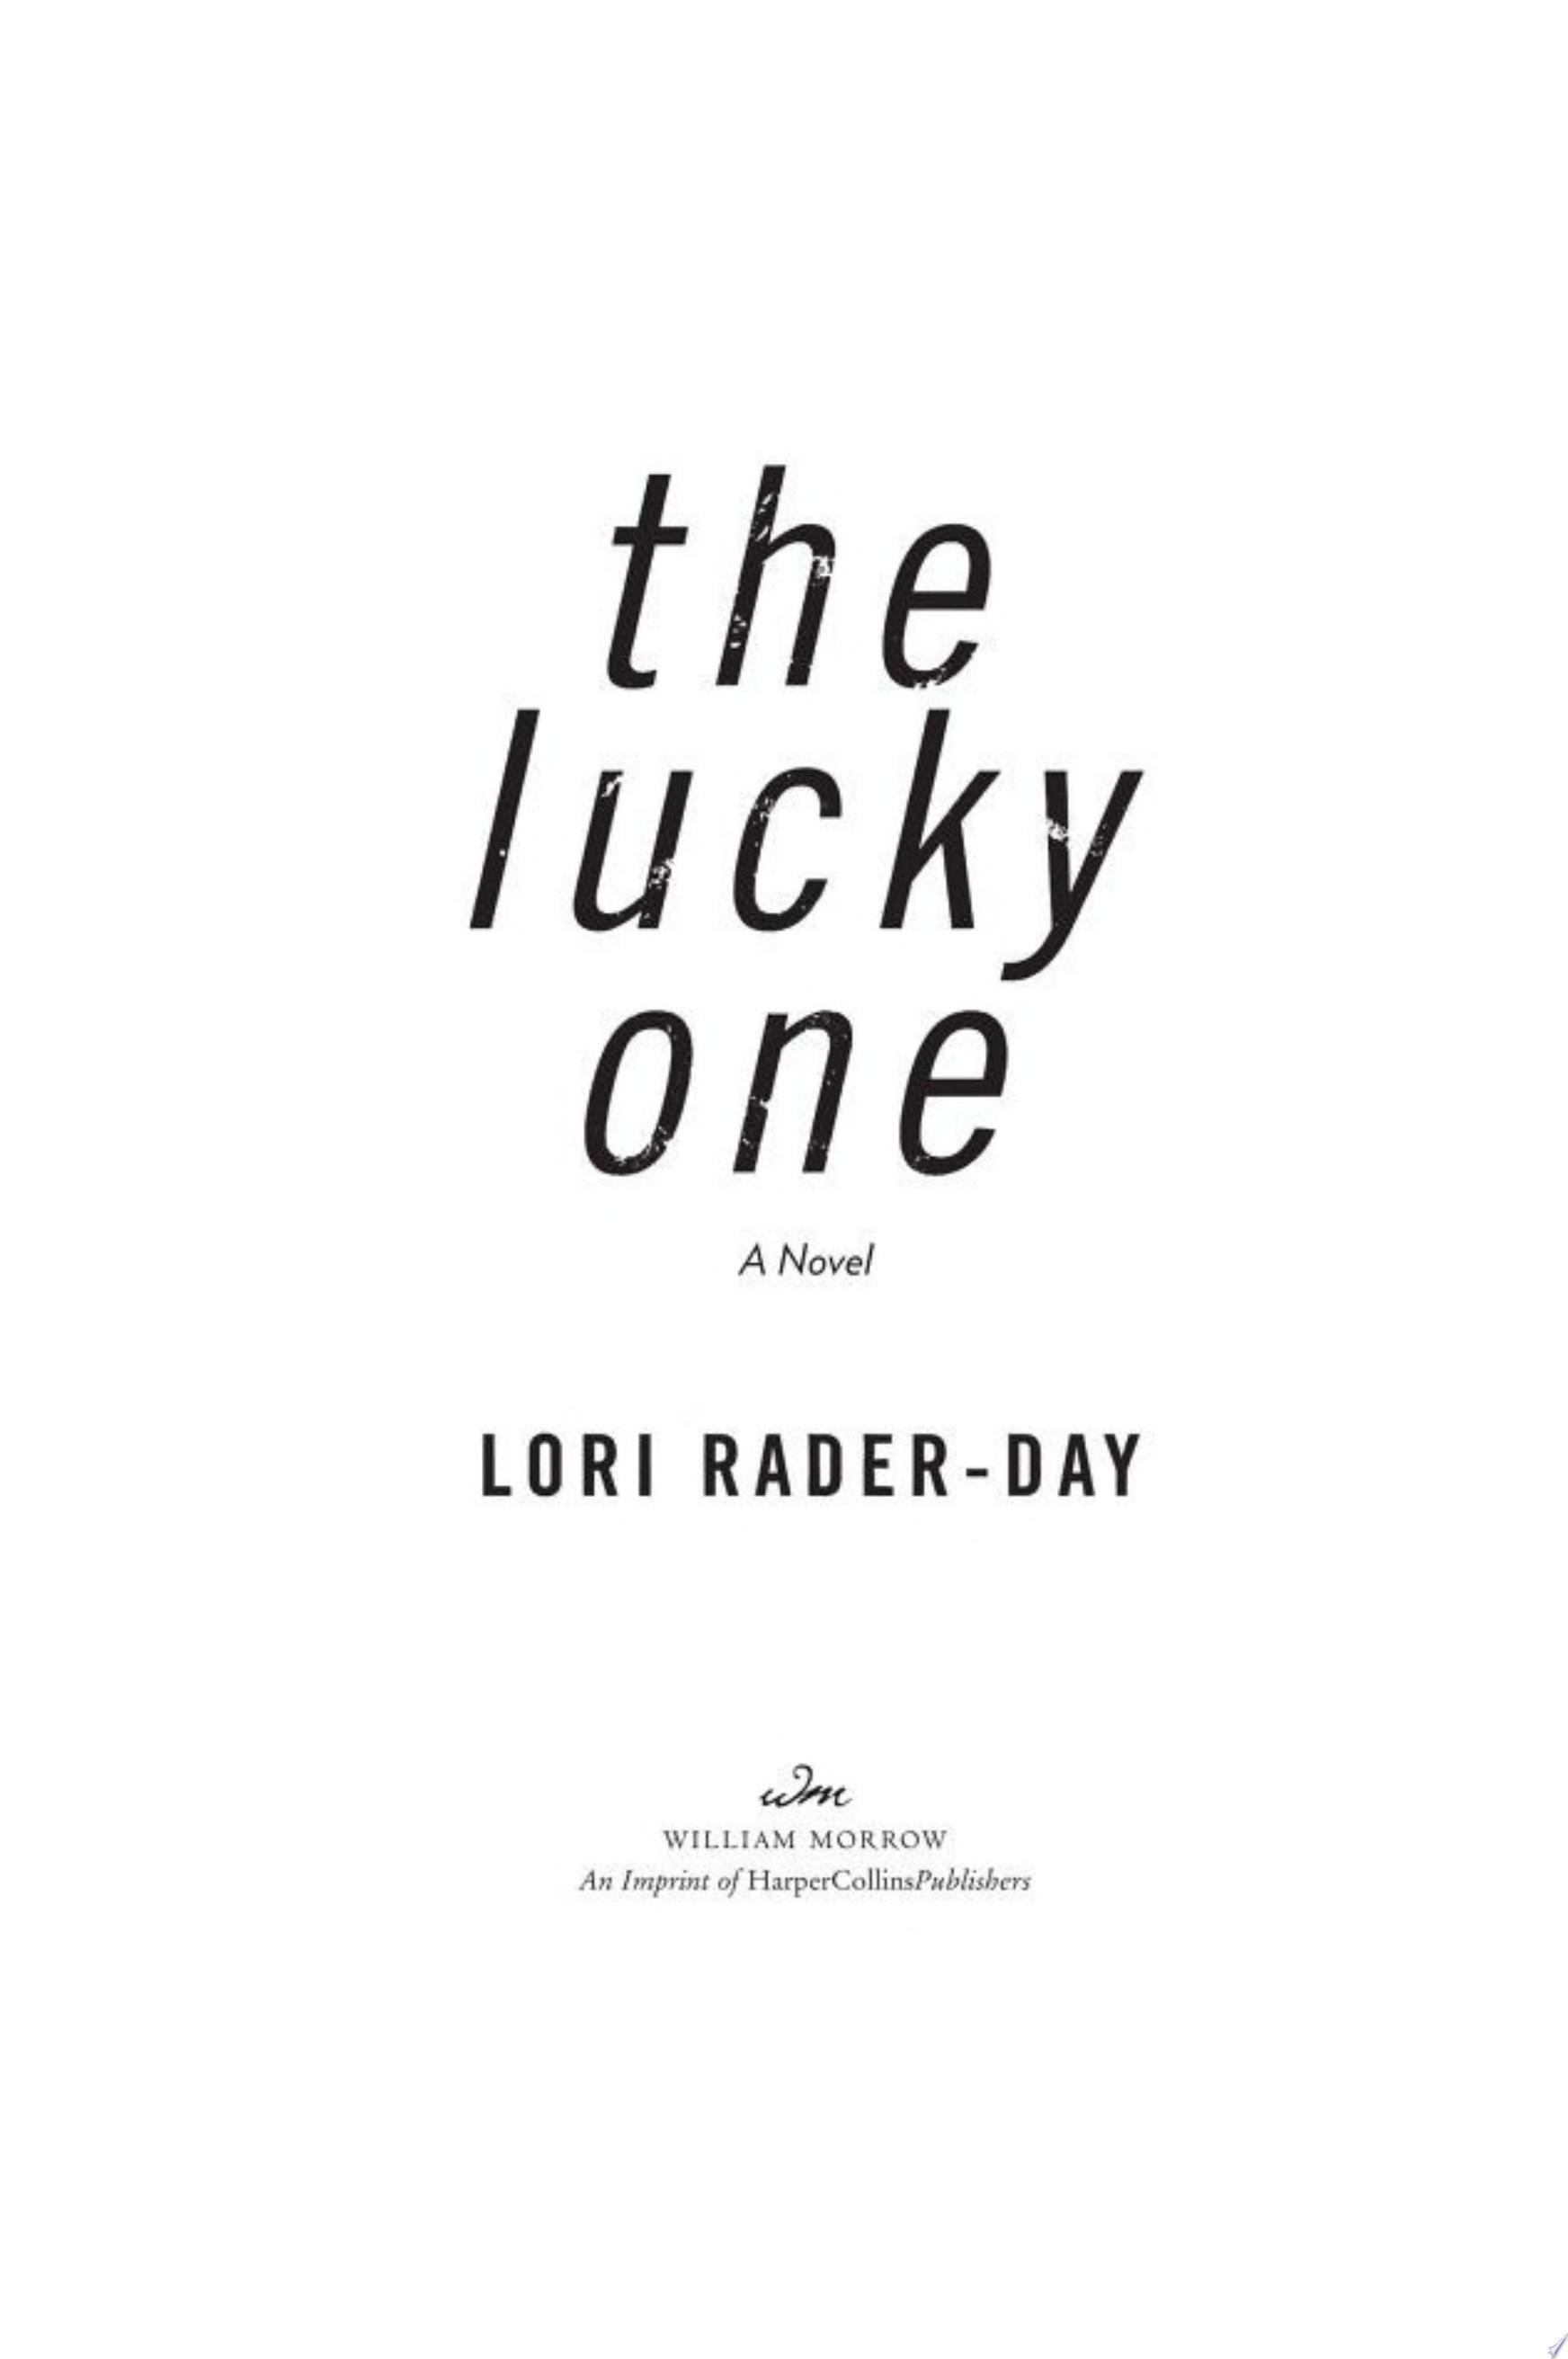 Image for "The Lucky One"